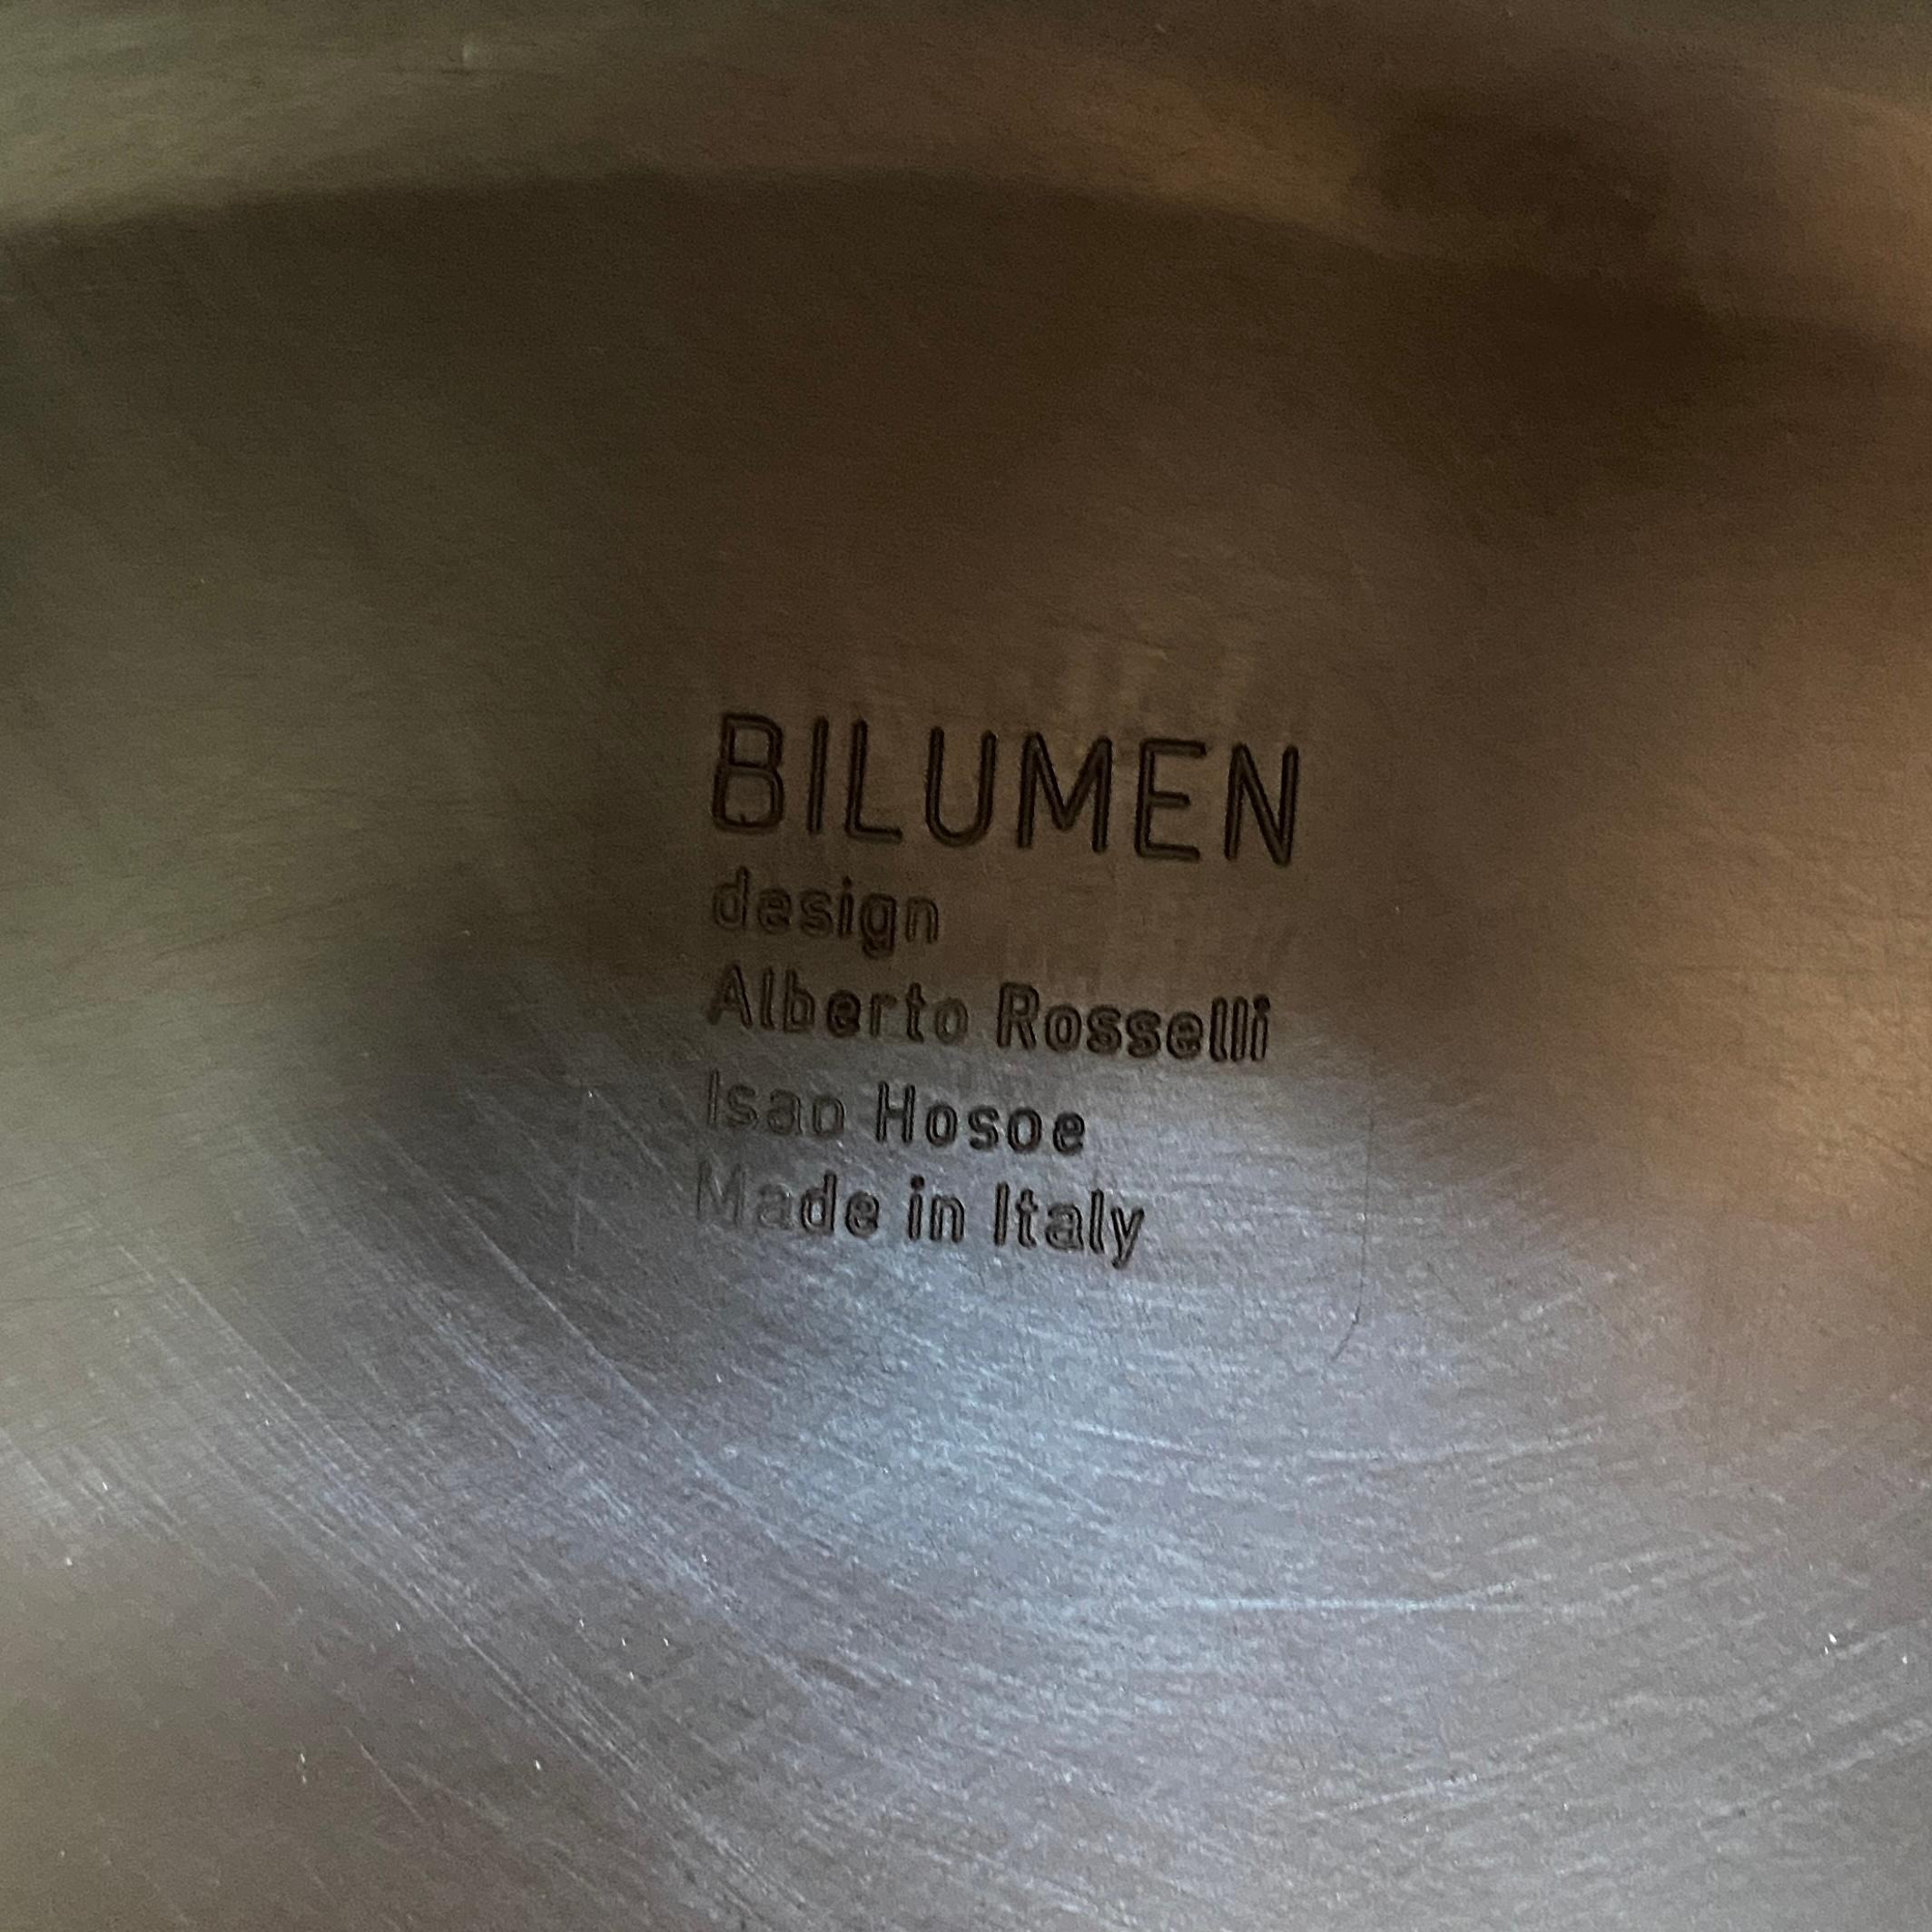 Modern Brown Plastic Table by Alberto Rosselli and Isao Hosoe for Bilumen, 1980s For Sale 4